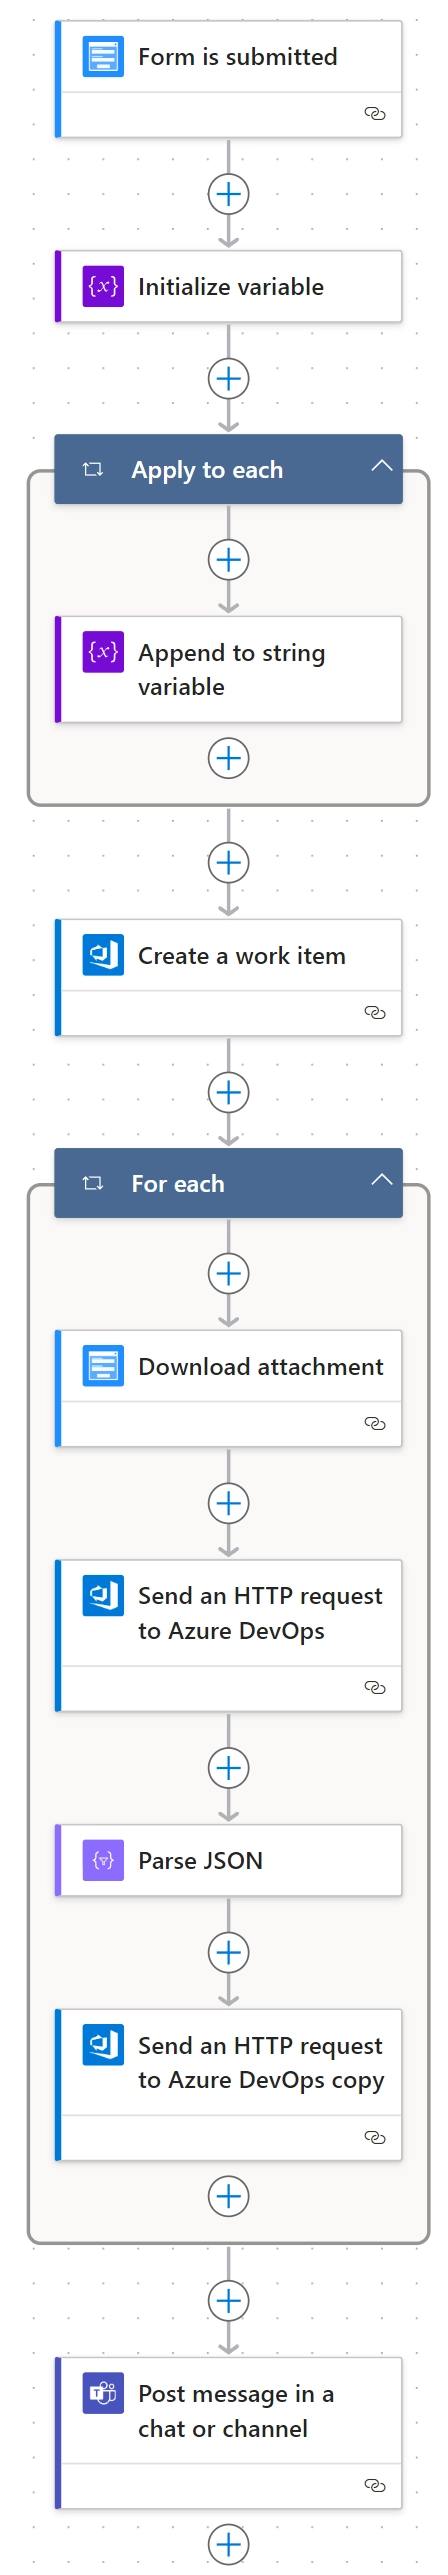 The entire PA flow to create a new ADO work item, handle the attachments, and send a notification in MS Teams